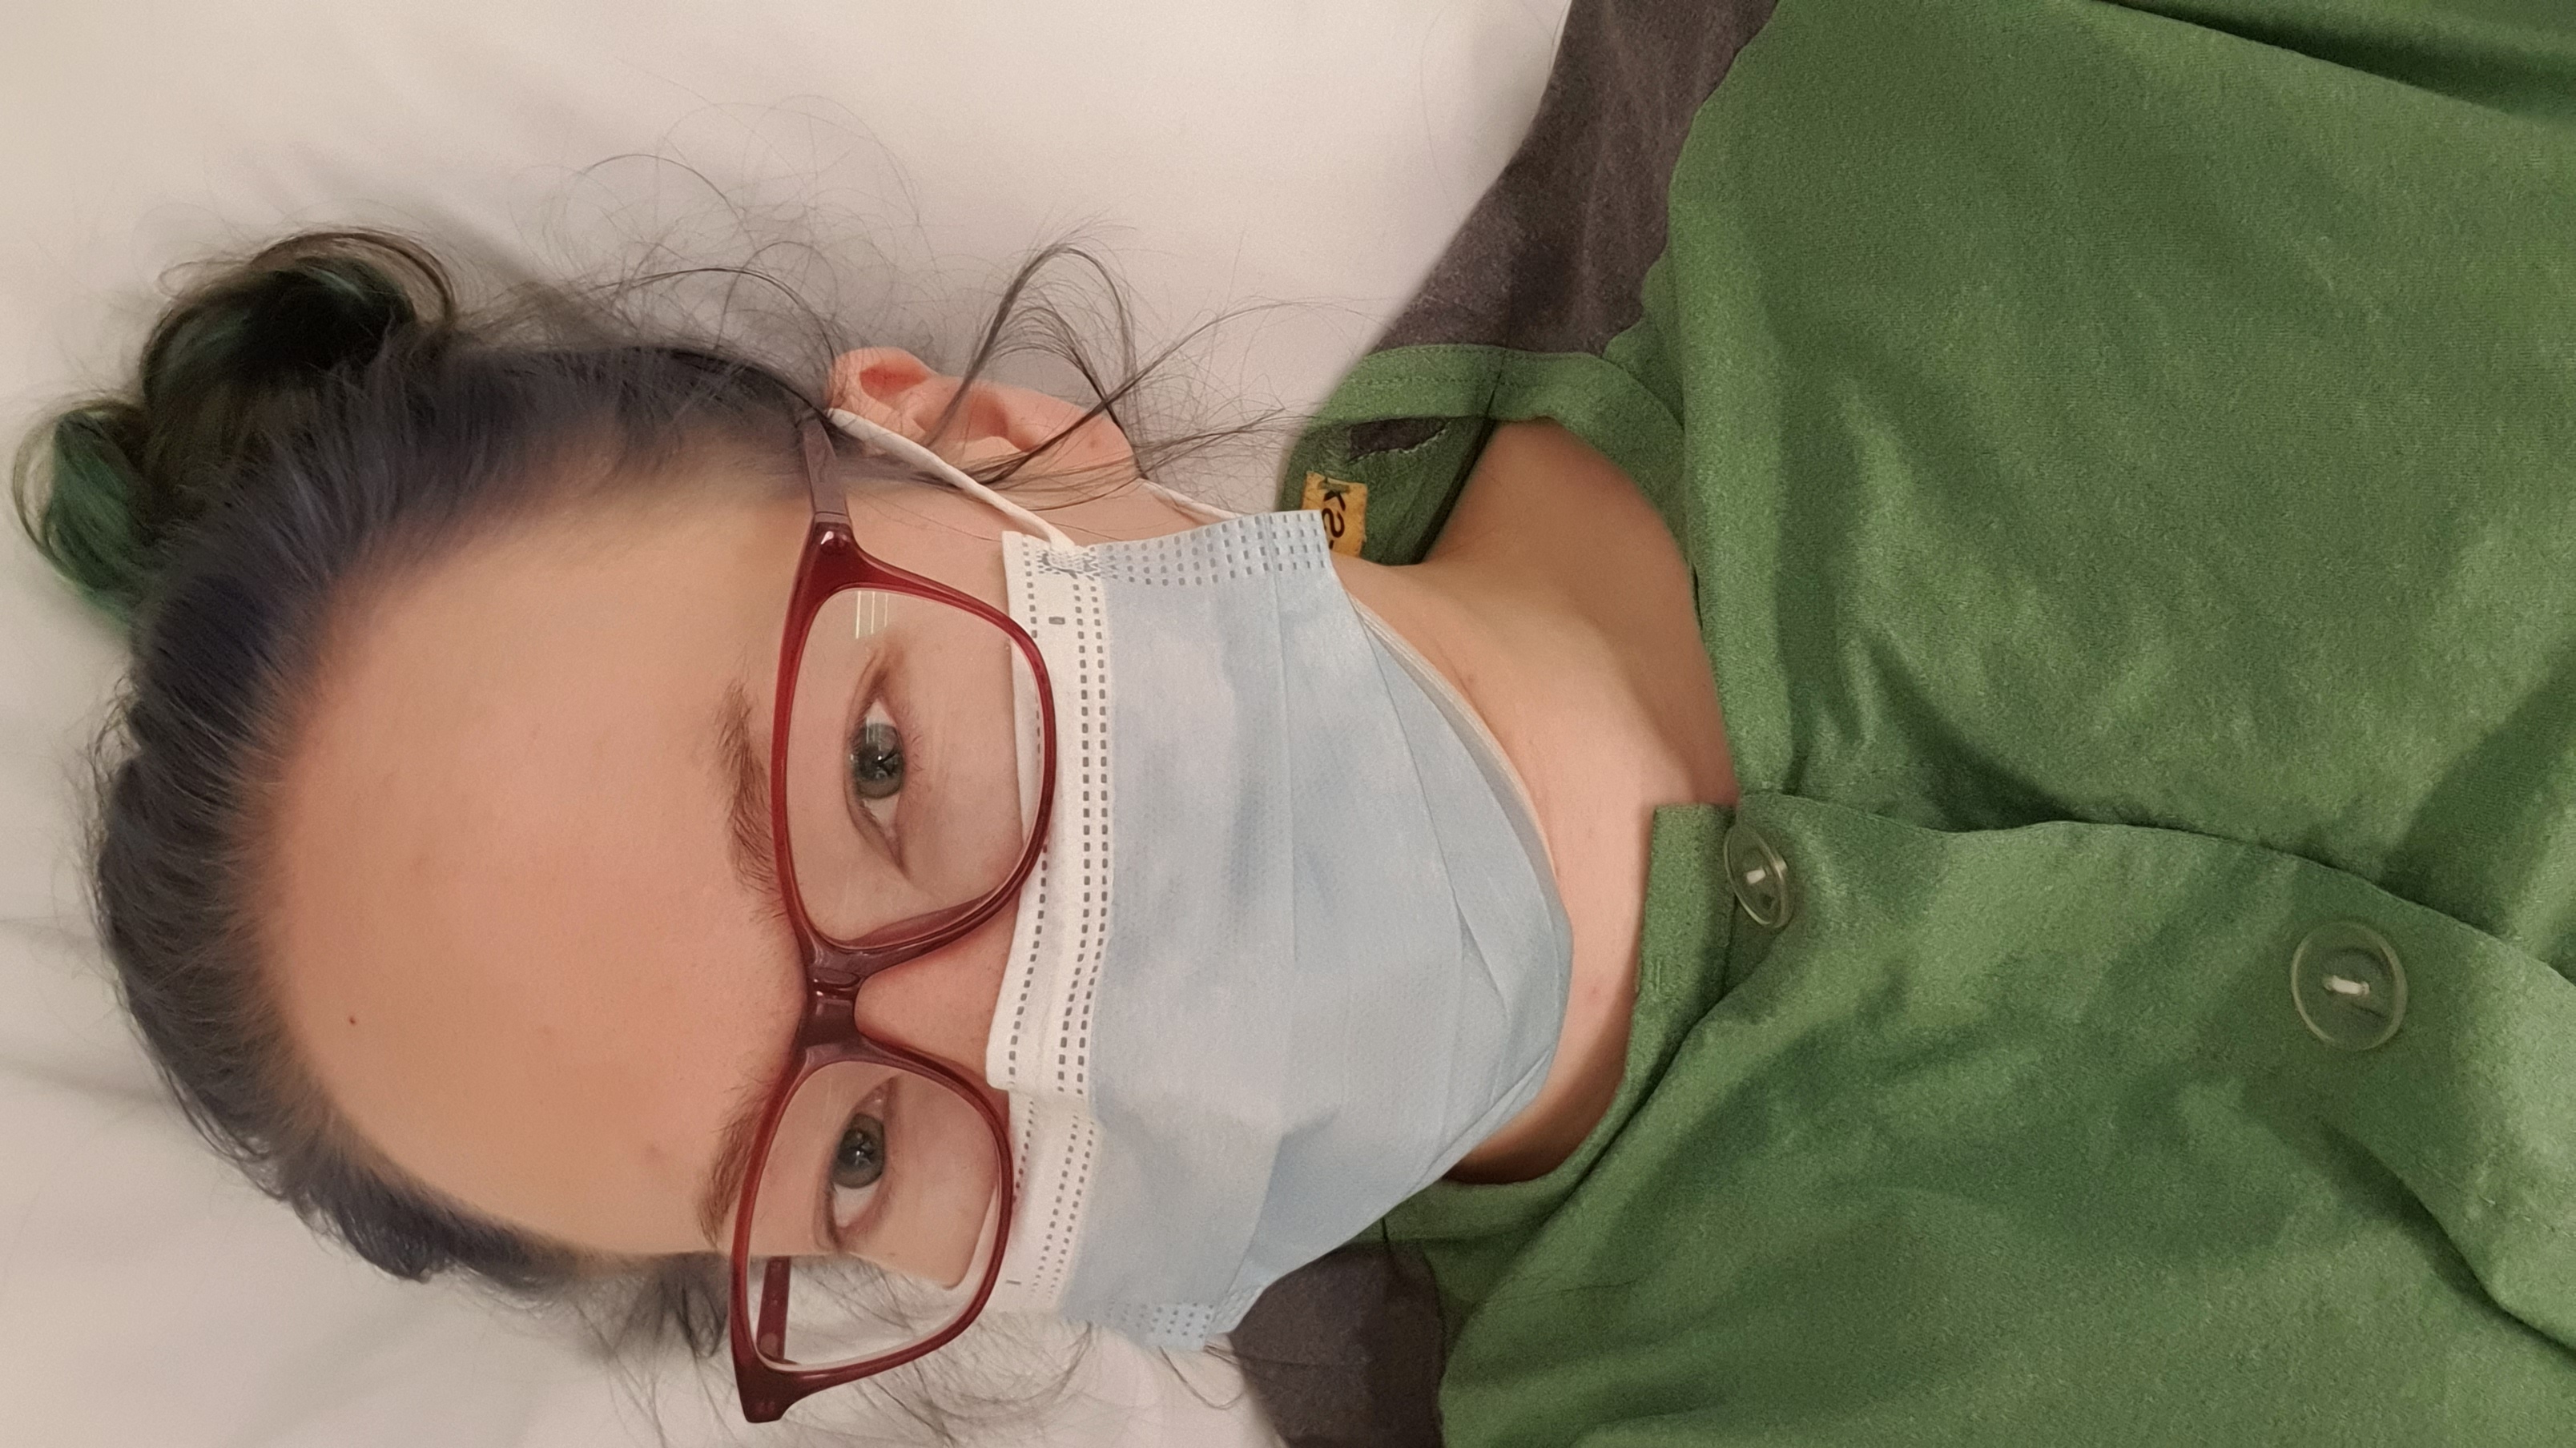 In hospital gown